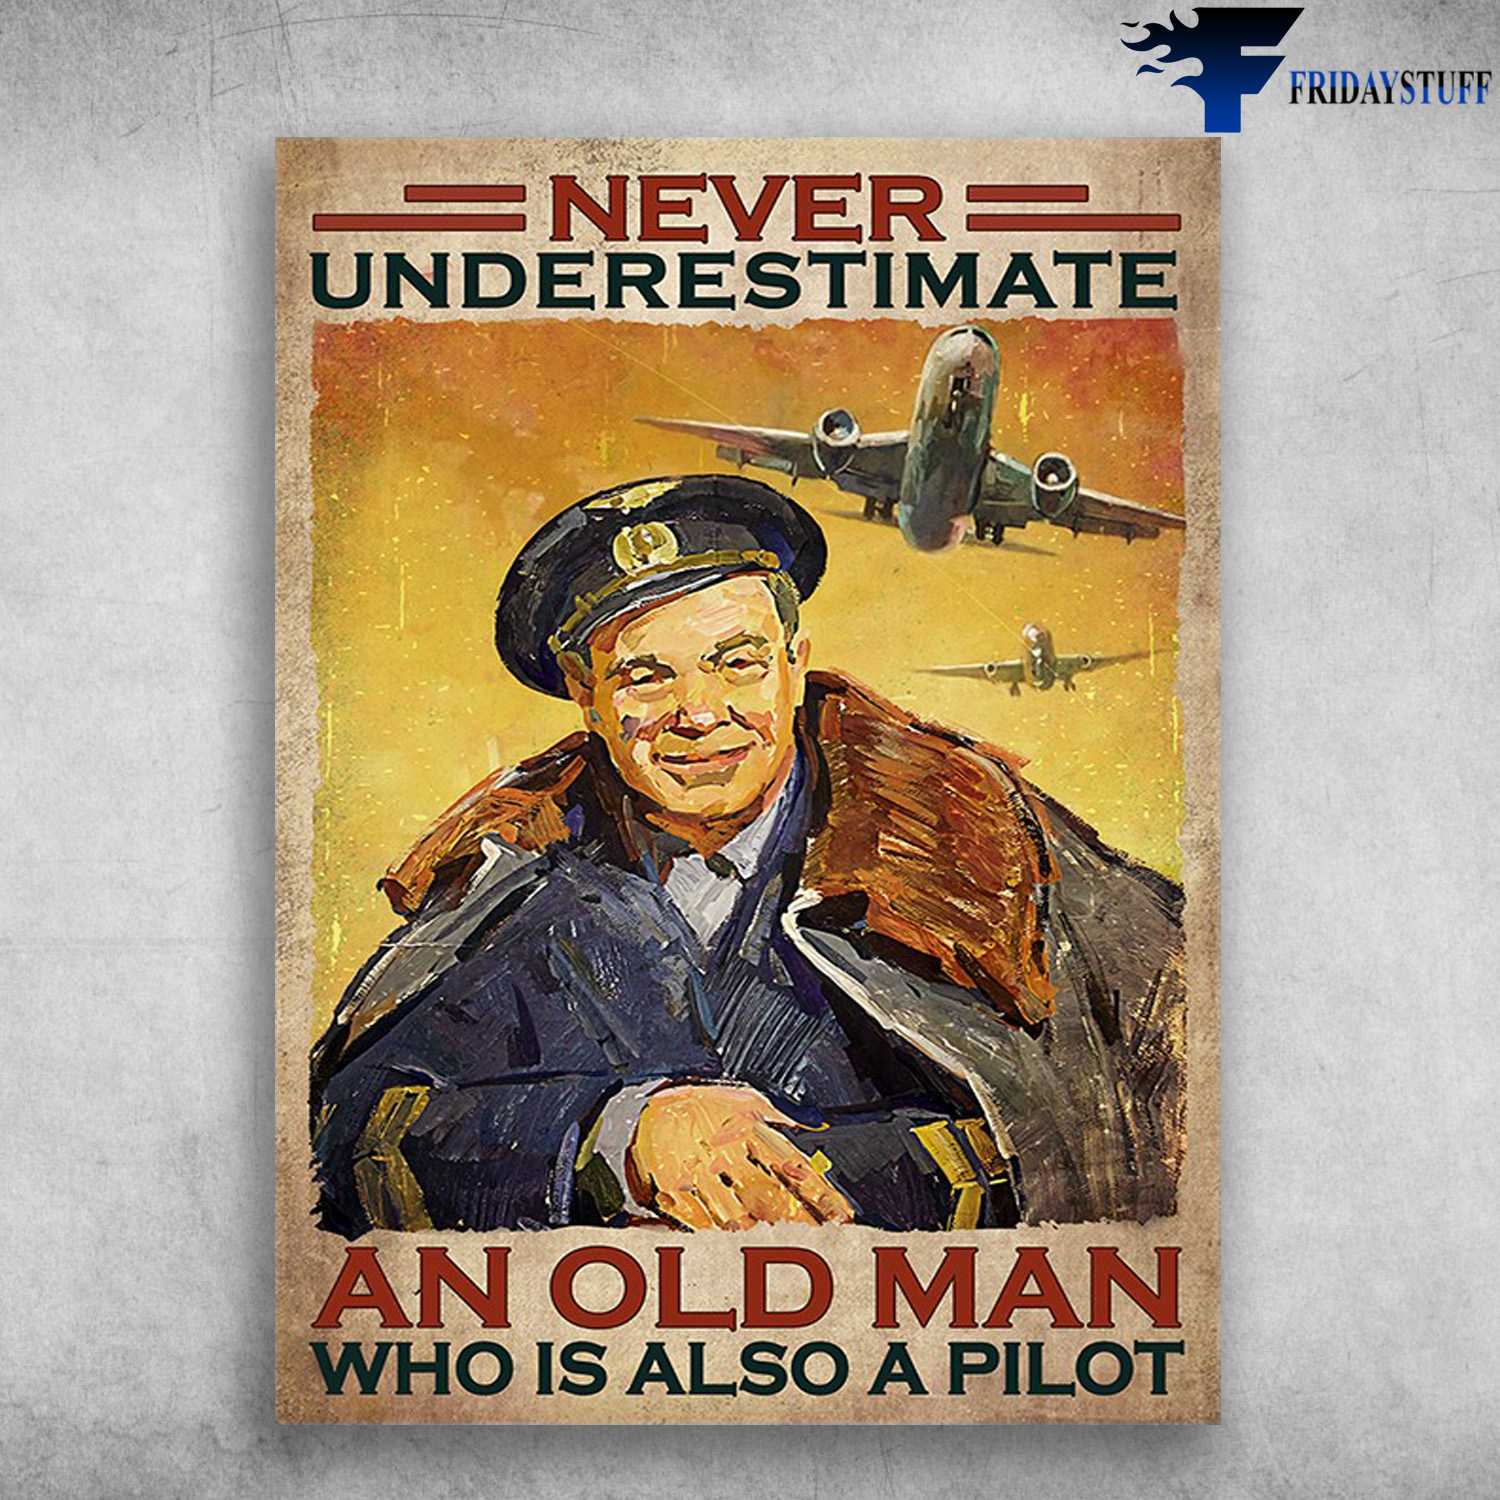 Old Pilot, Plane Poster - Never Underestimate An Old Man, Who Is Also A Pilot